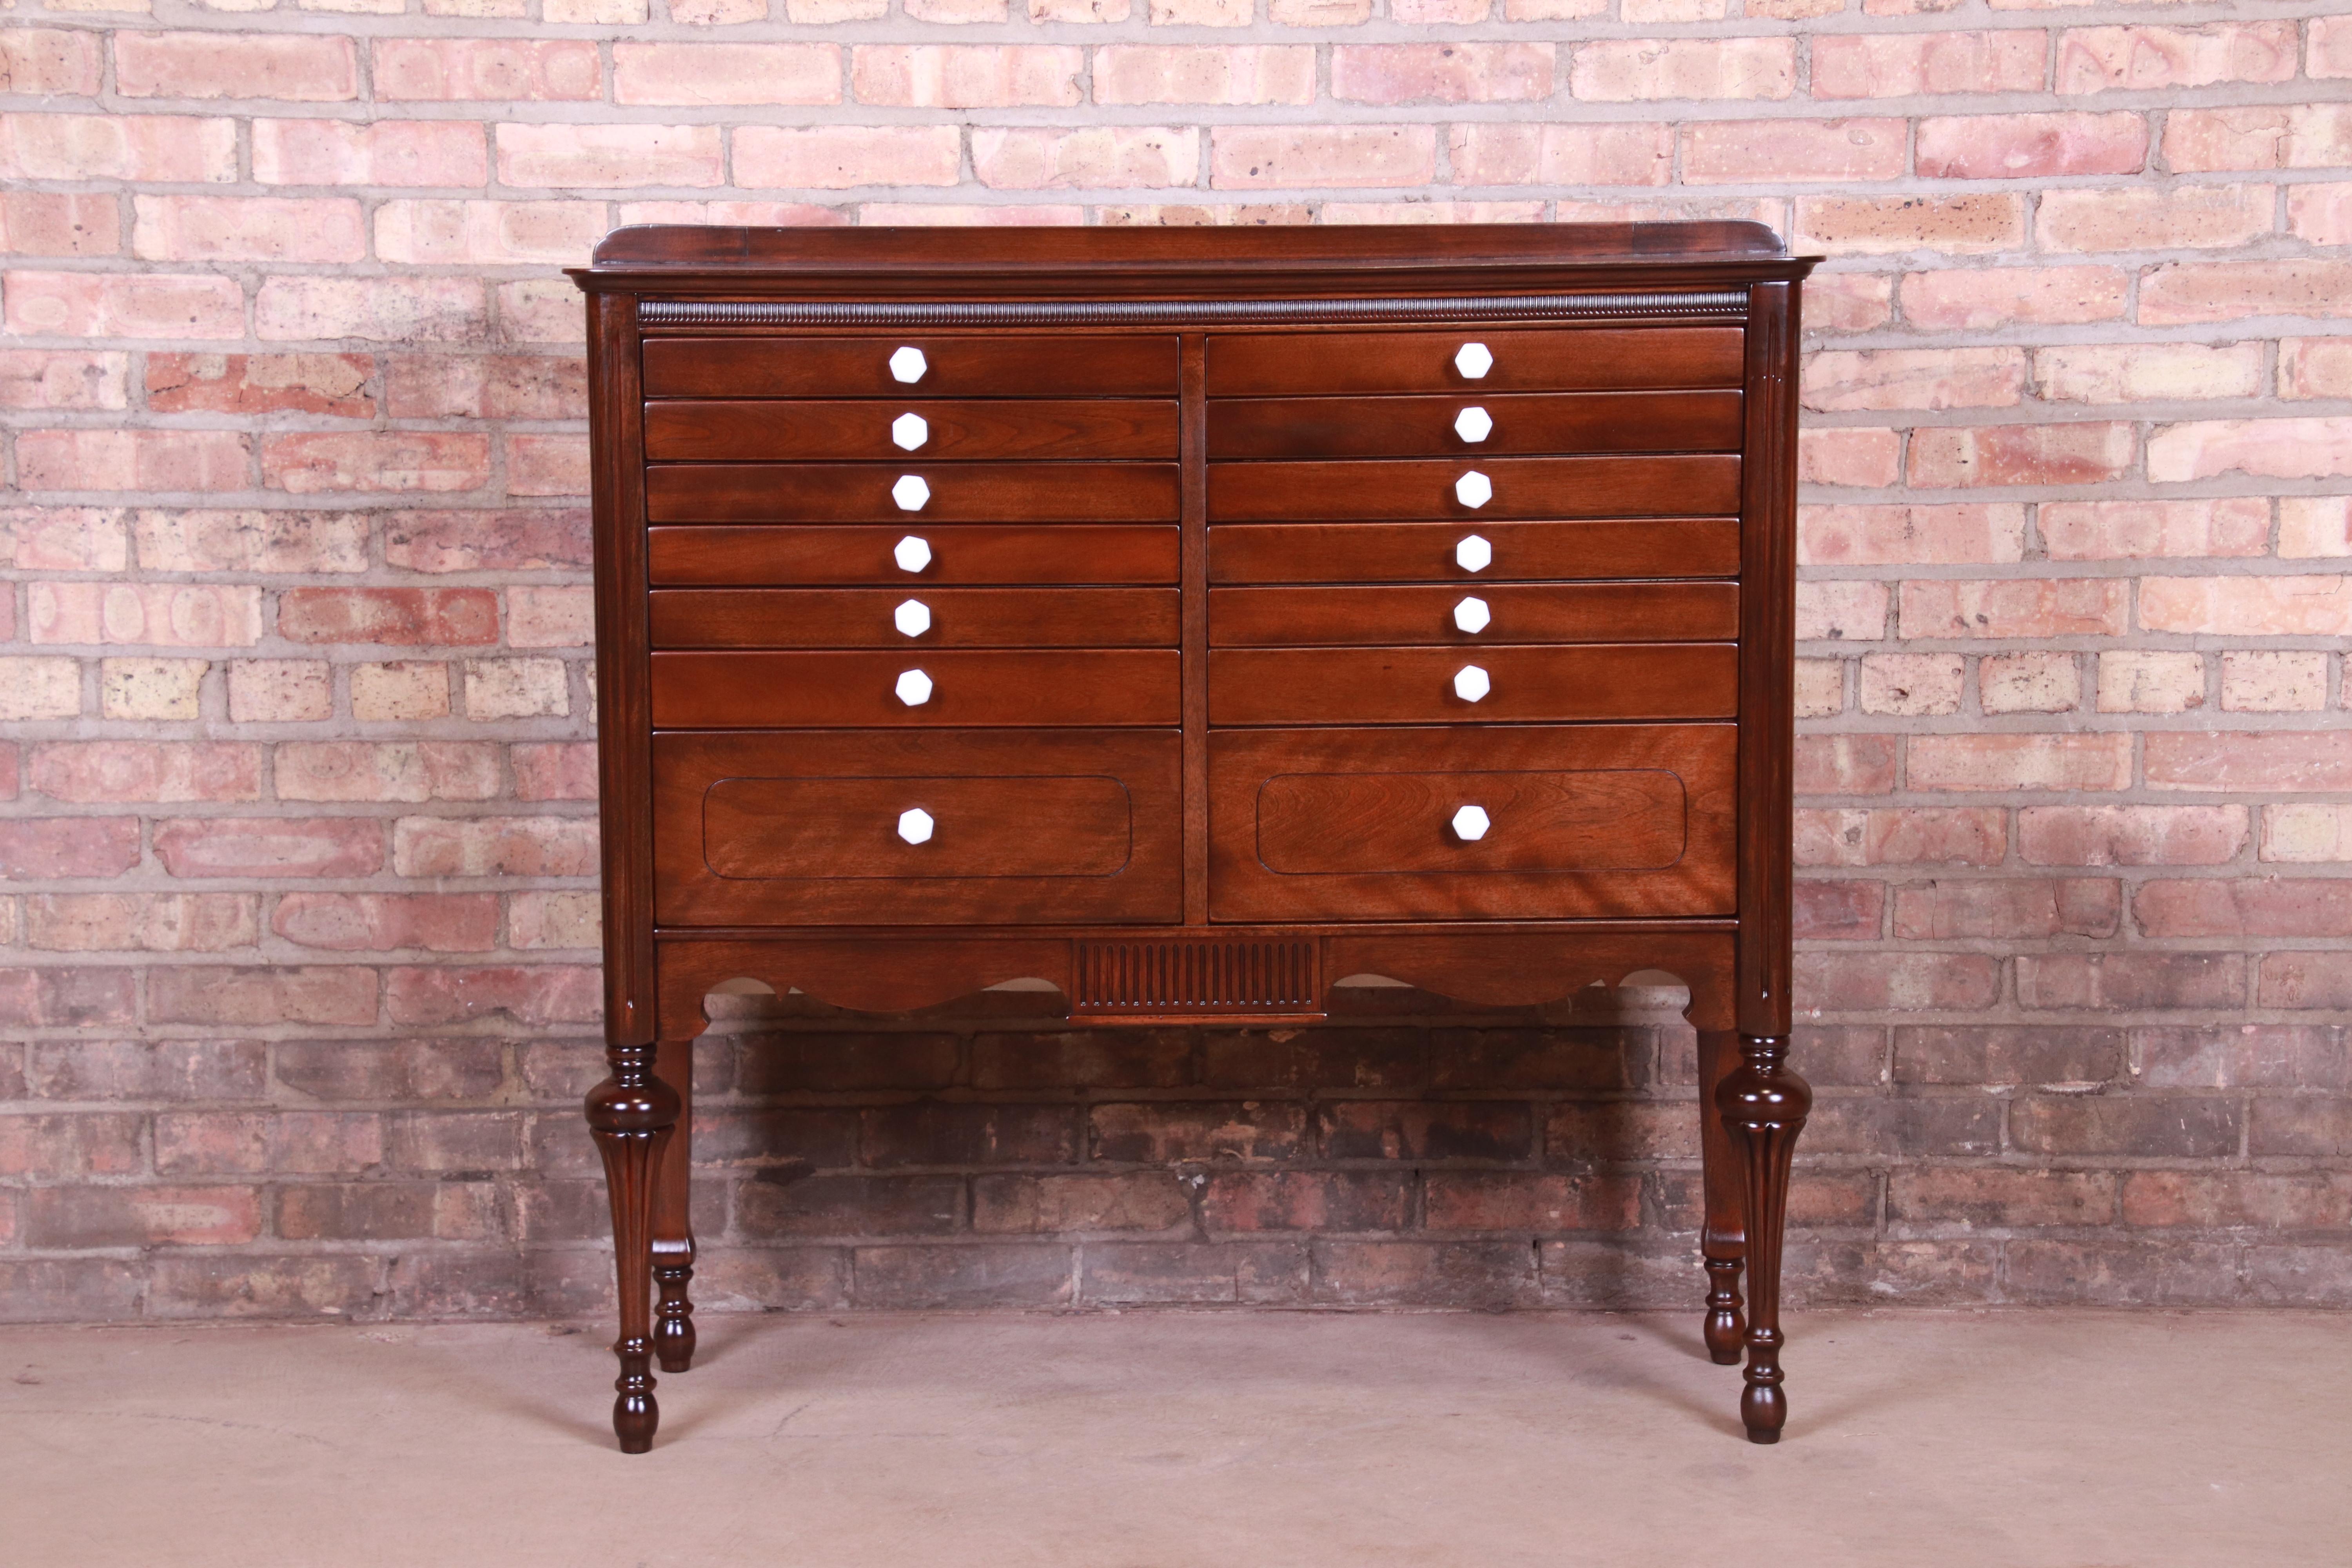 A rare and unique 14-drawer dental cabinet

USA, circa 1920s

Carved mahogany, with porcelain drawer pulls and metal drawer interiors.

Measures: 40.75